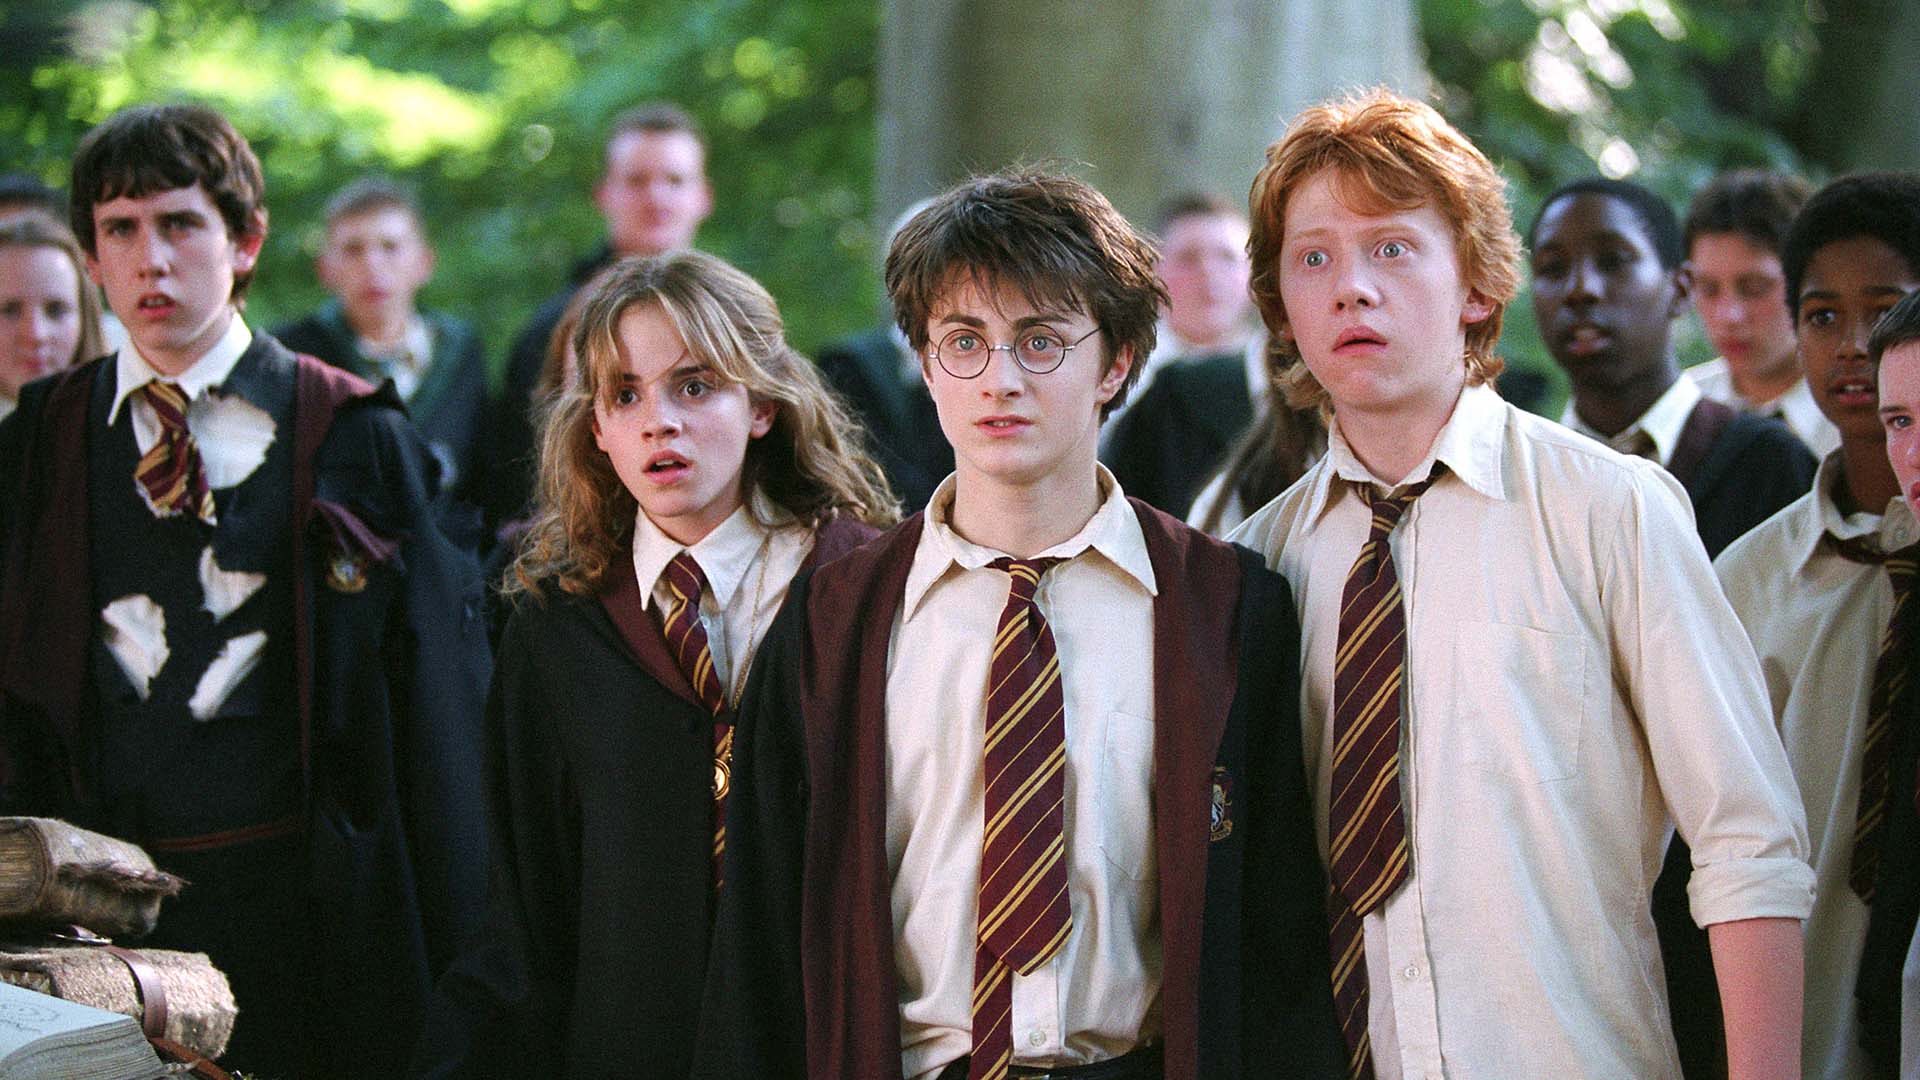 HBO's 'Harry Potter' Reunion Will Hit Binge on New Year's Day So 2022 Is Already Looking Magical